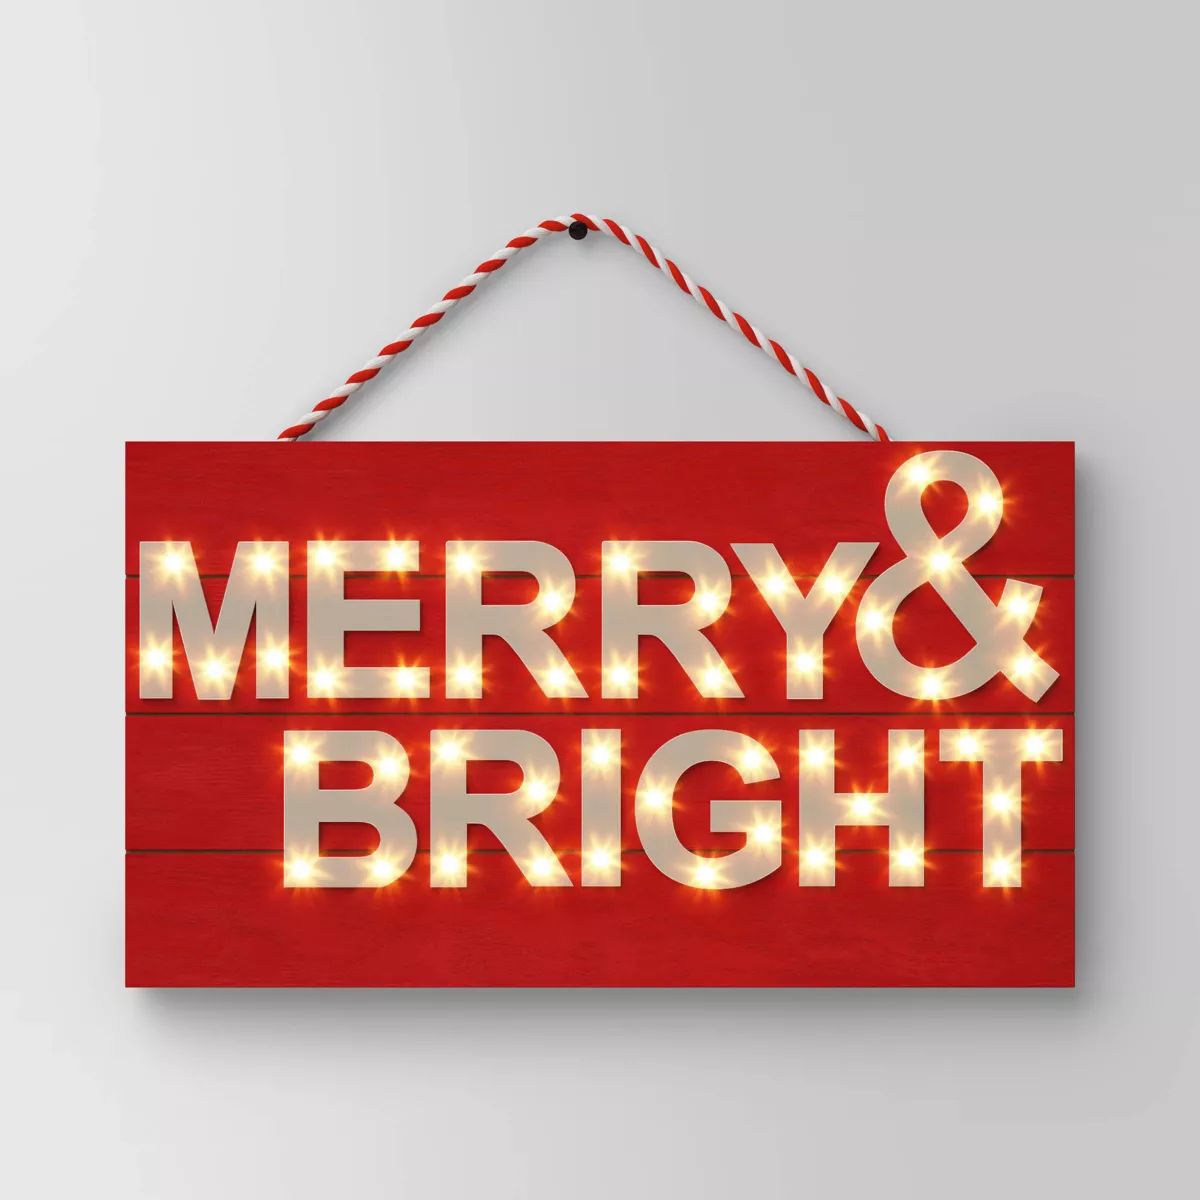 16"x10" Battery Operated Lit 'Merry & Bright' Hanging Christmas Wood Wall Sign - Wondershop™ | Target